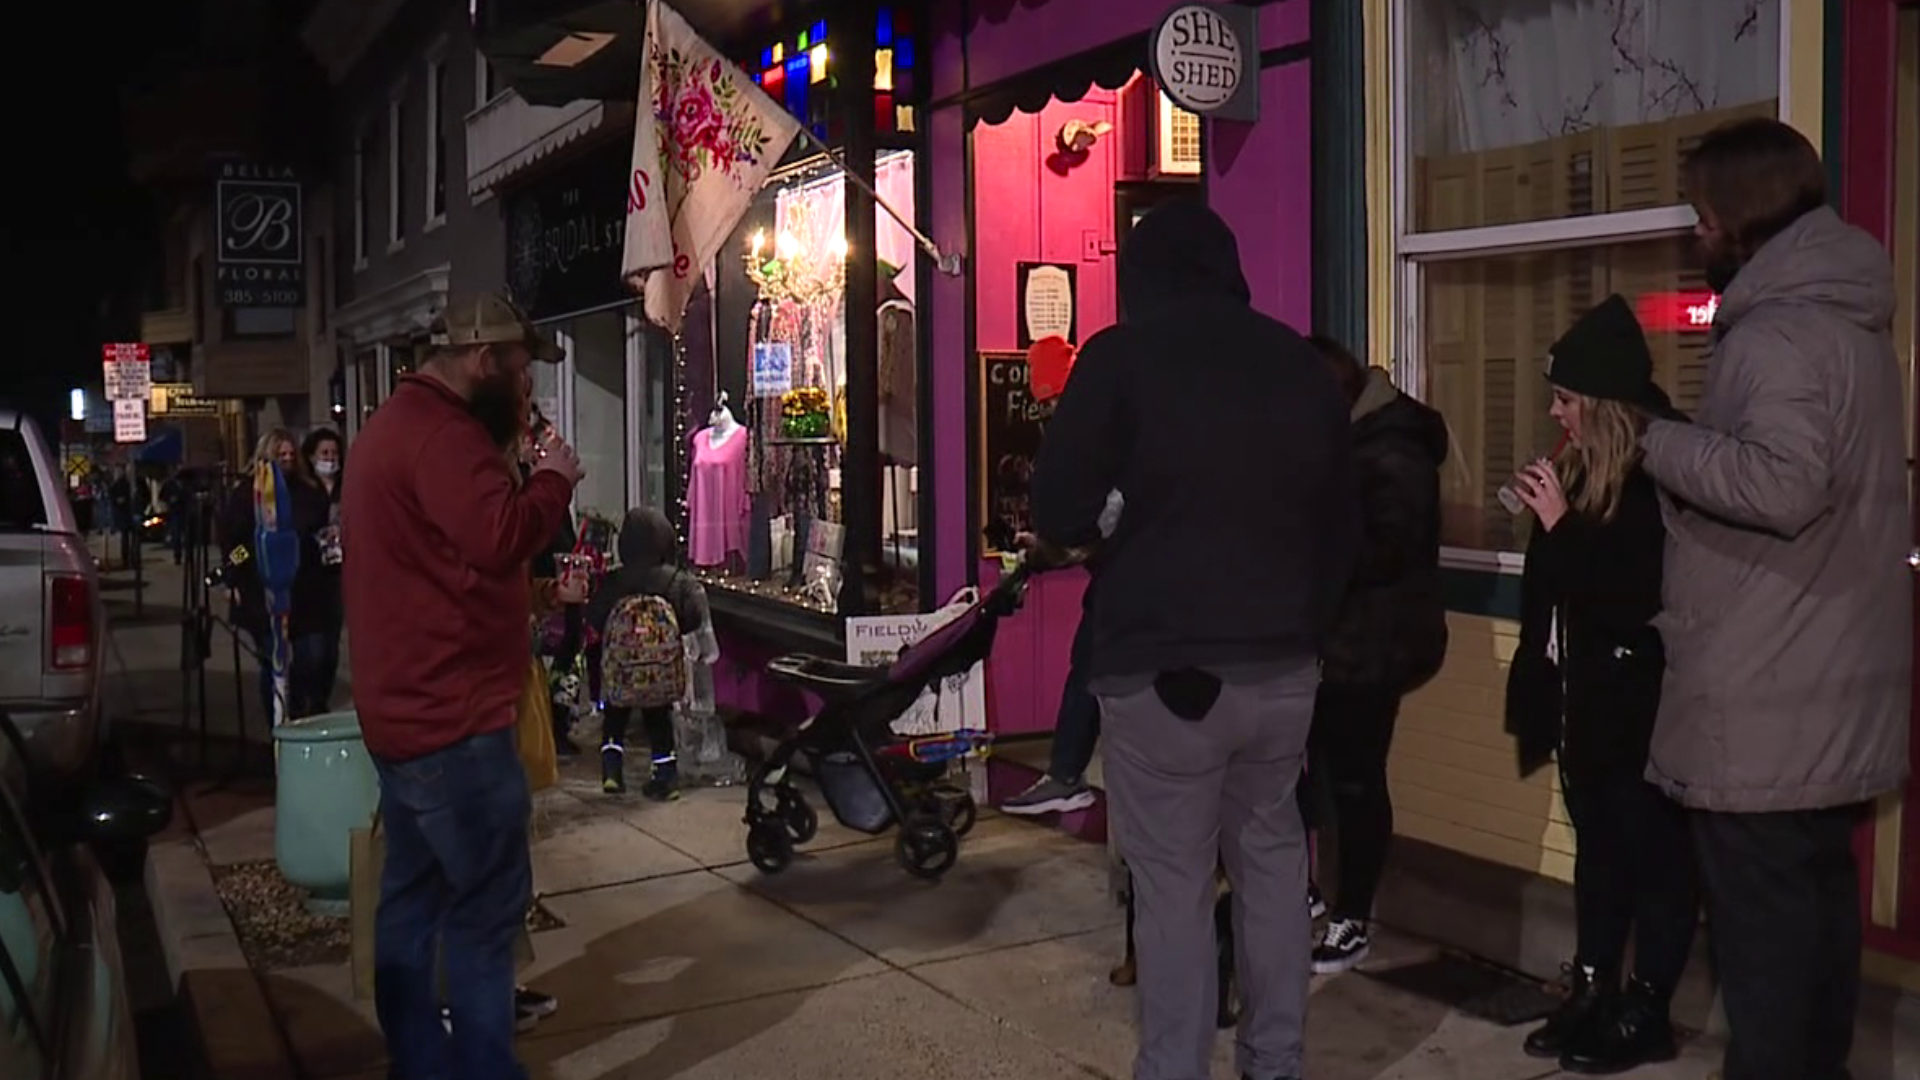 Businesses in Schuylkill Haven held the "Winter Wine and Shine Walk" event along Main Street.